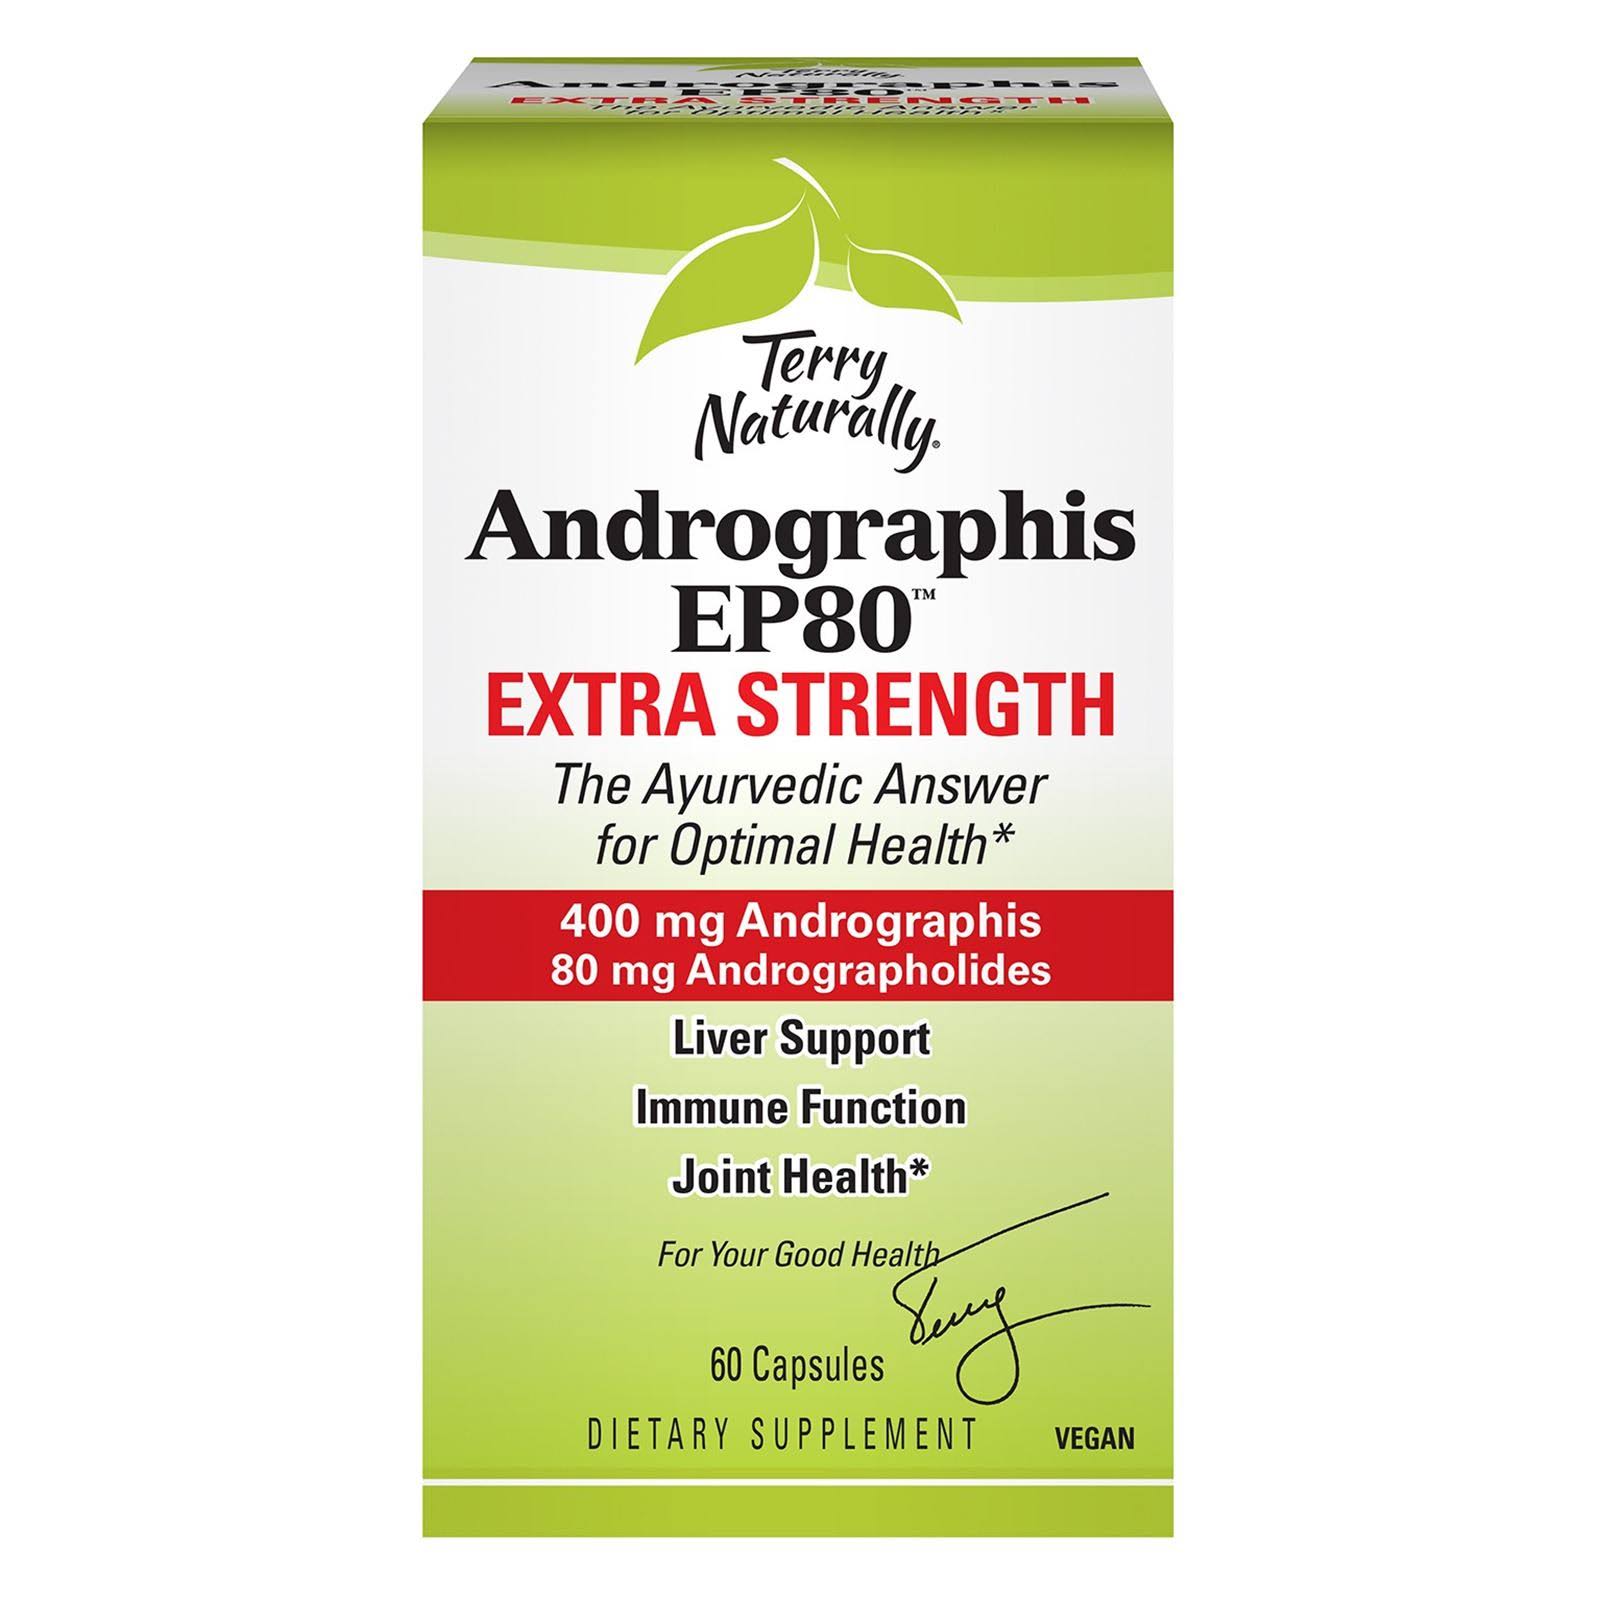 Terry Naturally Andrographis EP80 Extra Strength (60 Capsules)